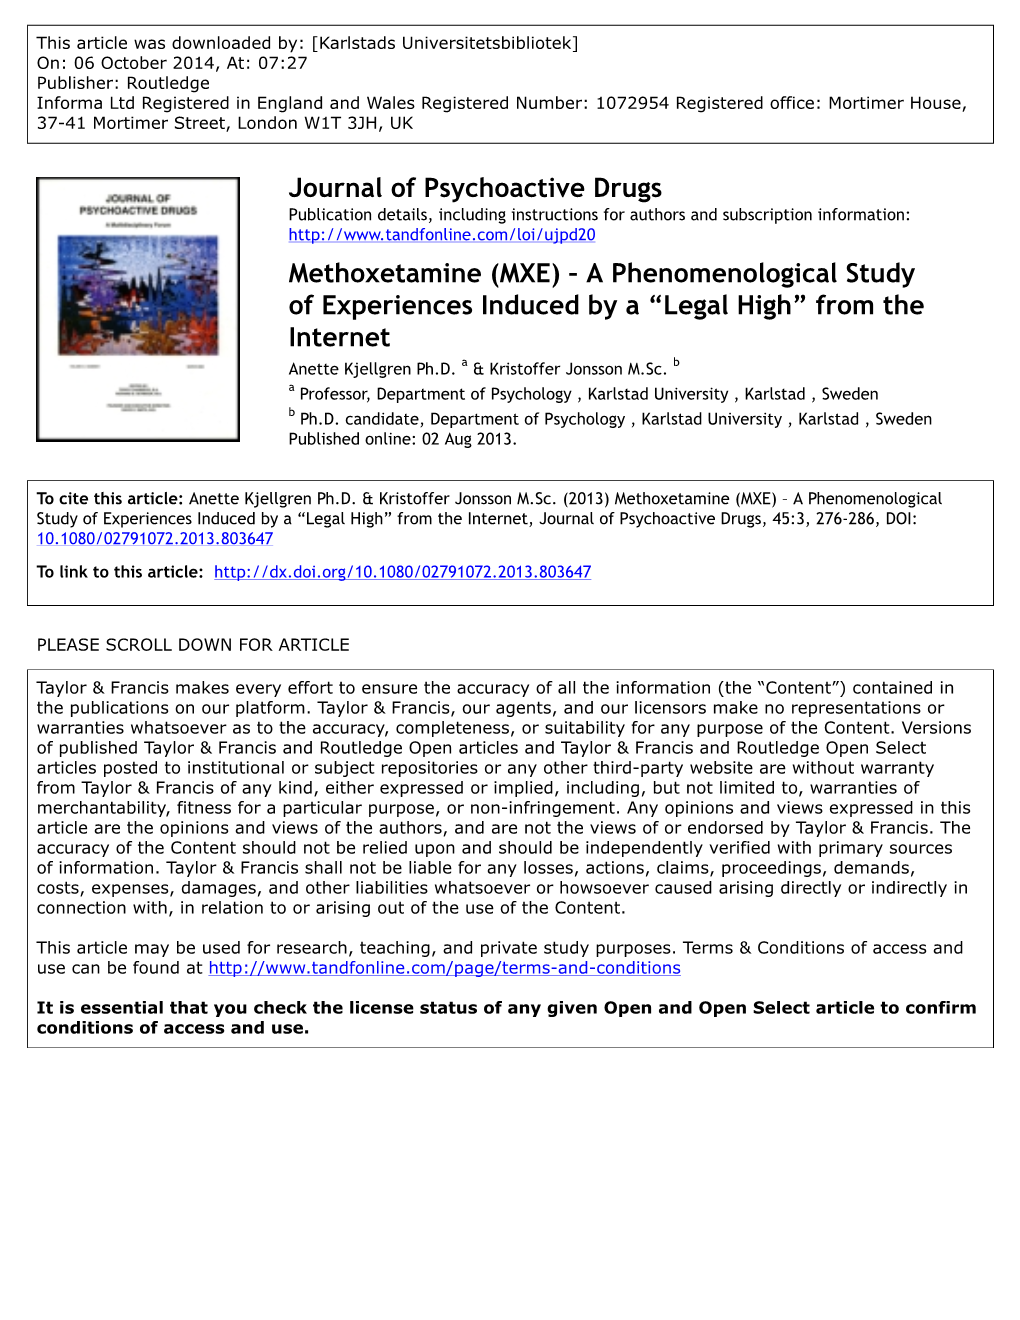 MXE) – a Phenomenological Study of Experiences Induced by a “Legal High” from the Internet Anette Kjellgren Ph.D